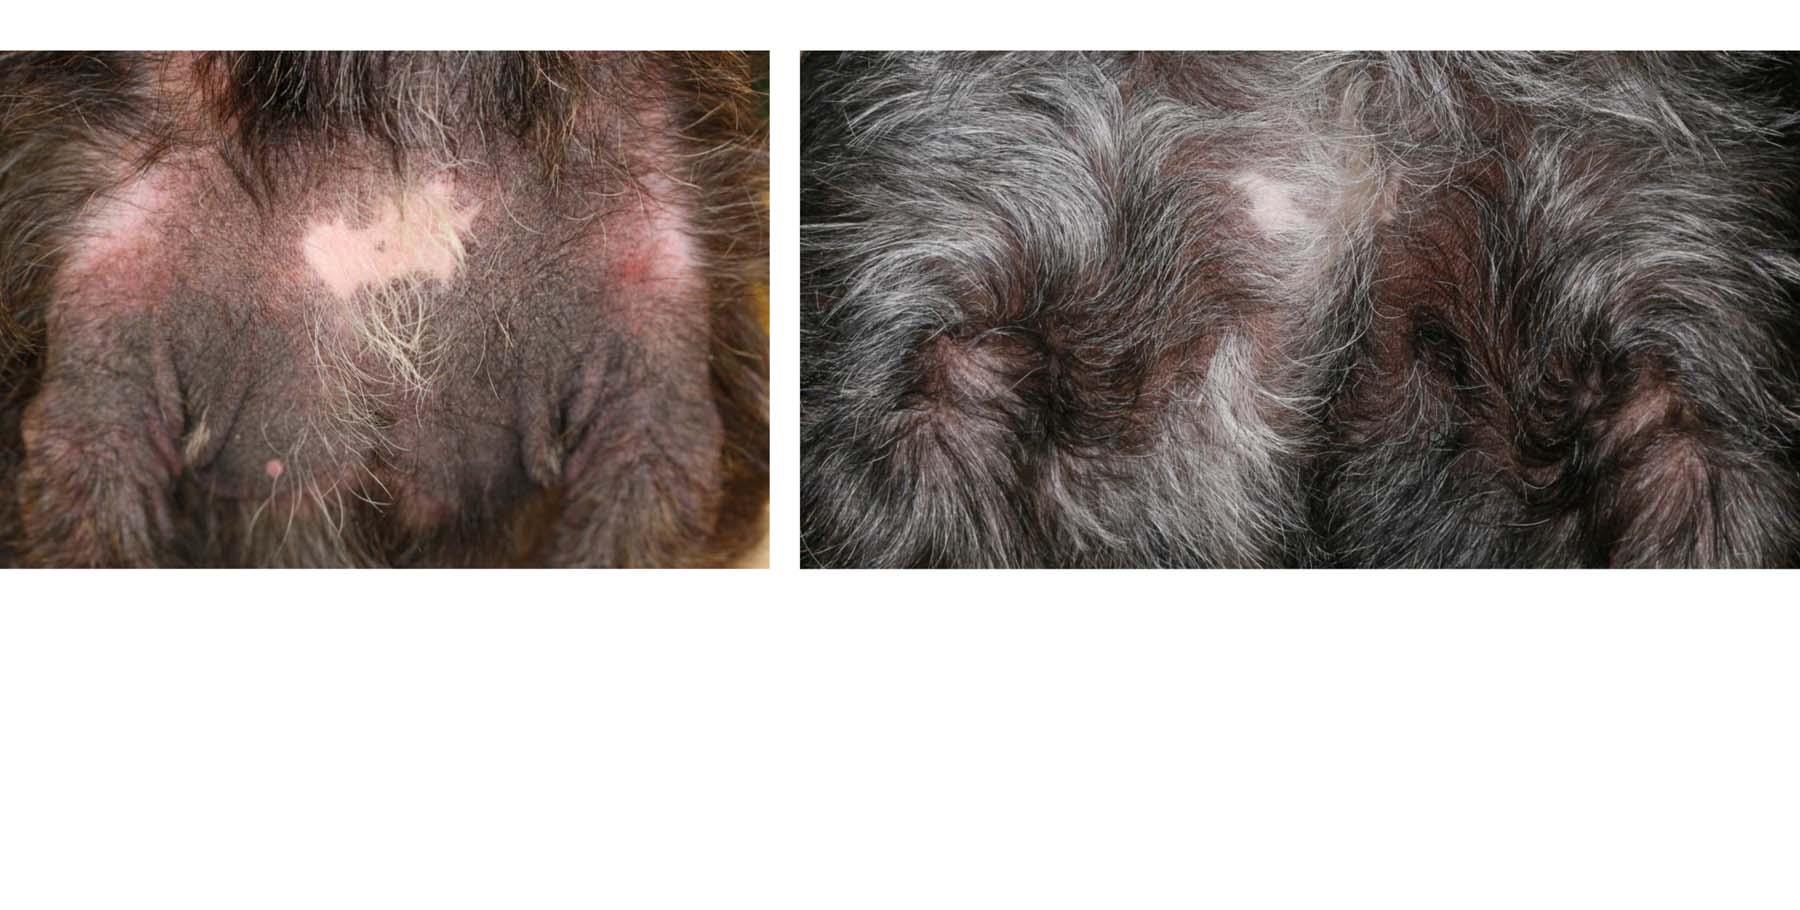 Severe Atopic Dermatitis: Response after 20 months of Dynamic Sequential Multimodal Treatment, Terrier Crossbreed